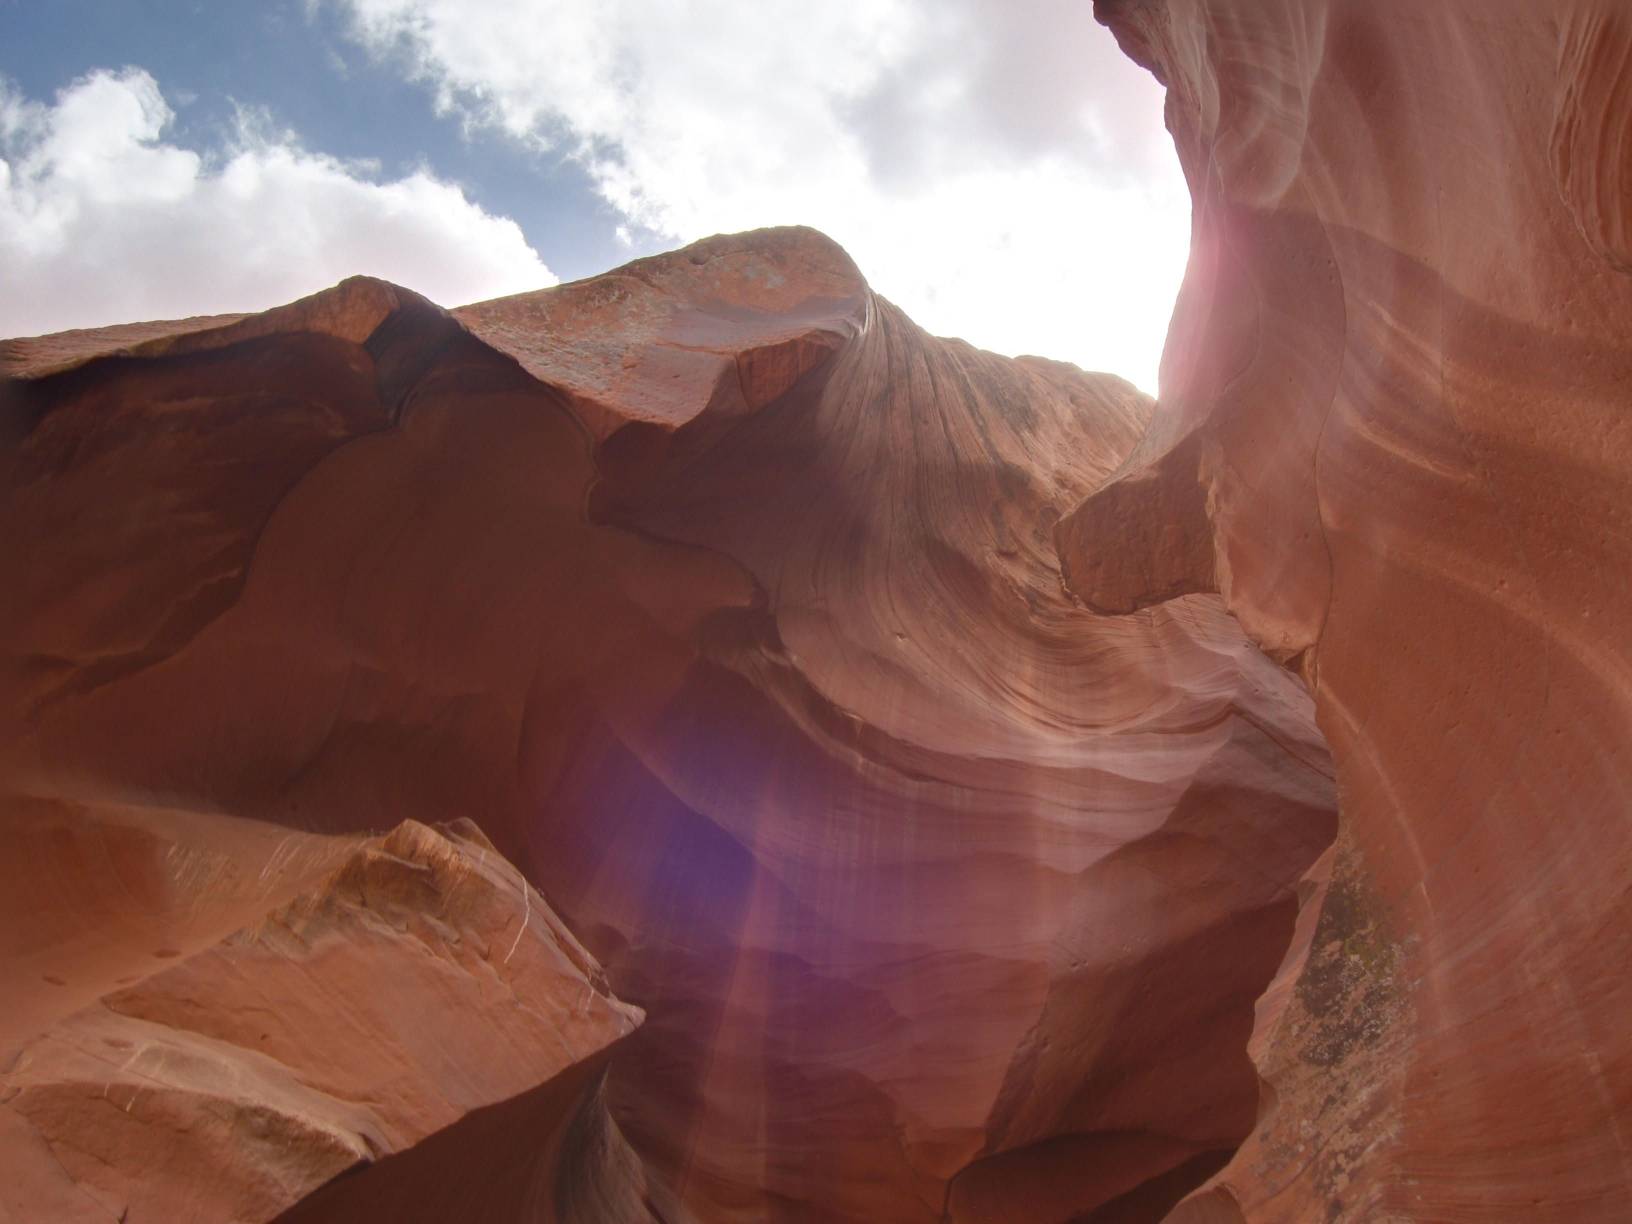 Image: The end of the Upper Antelope Canyon